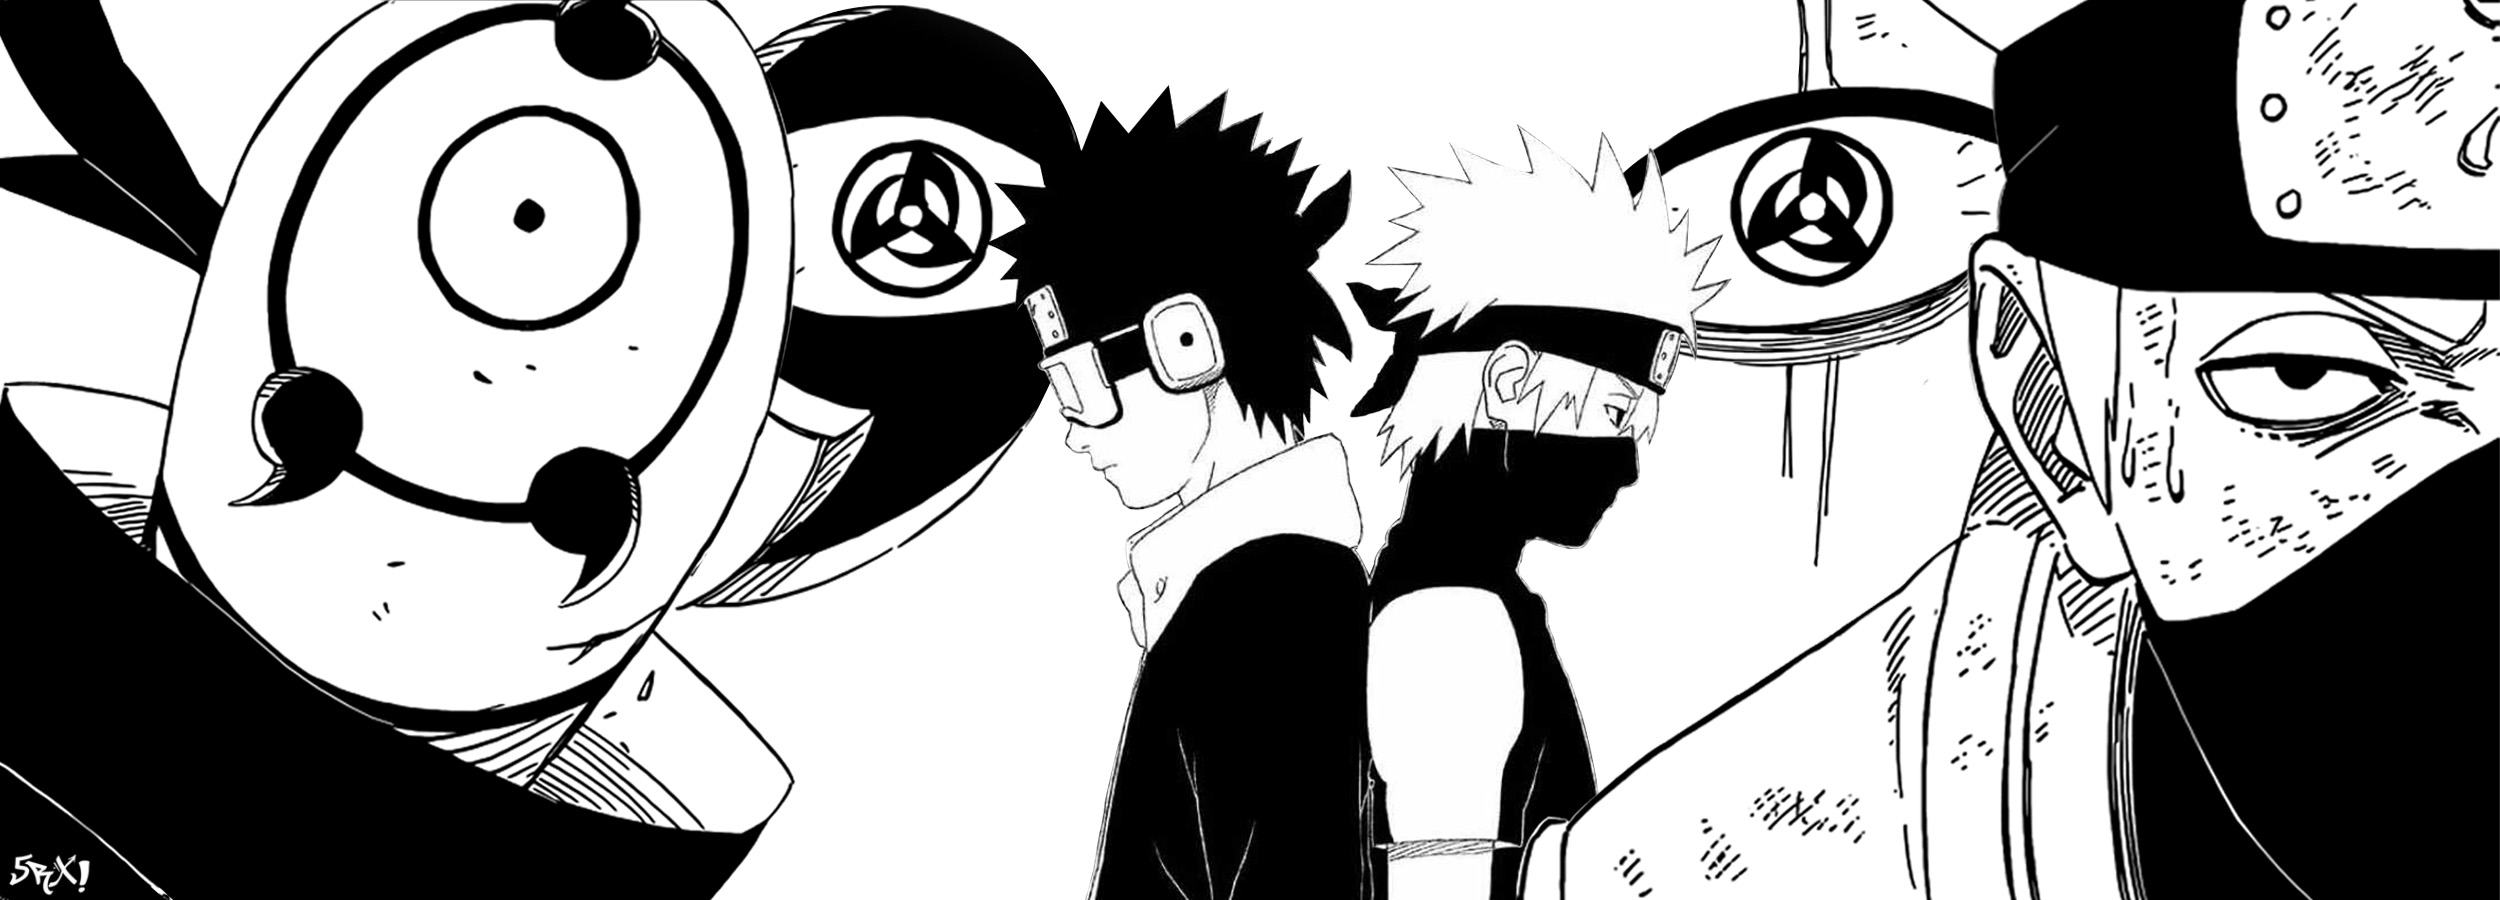 Kakashi And Obito By 5rx